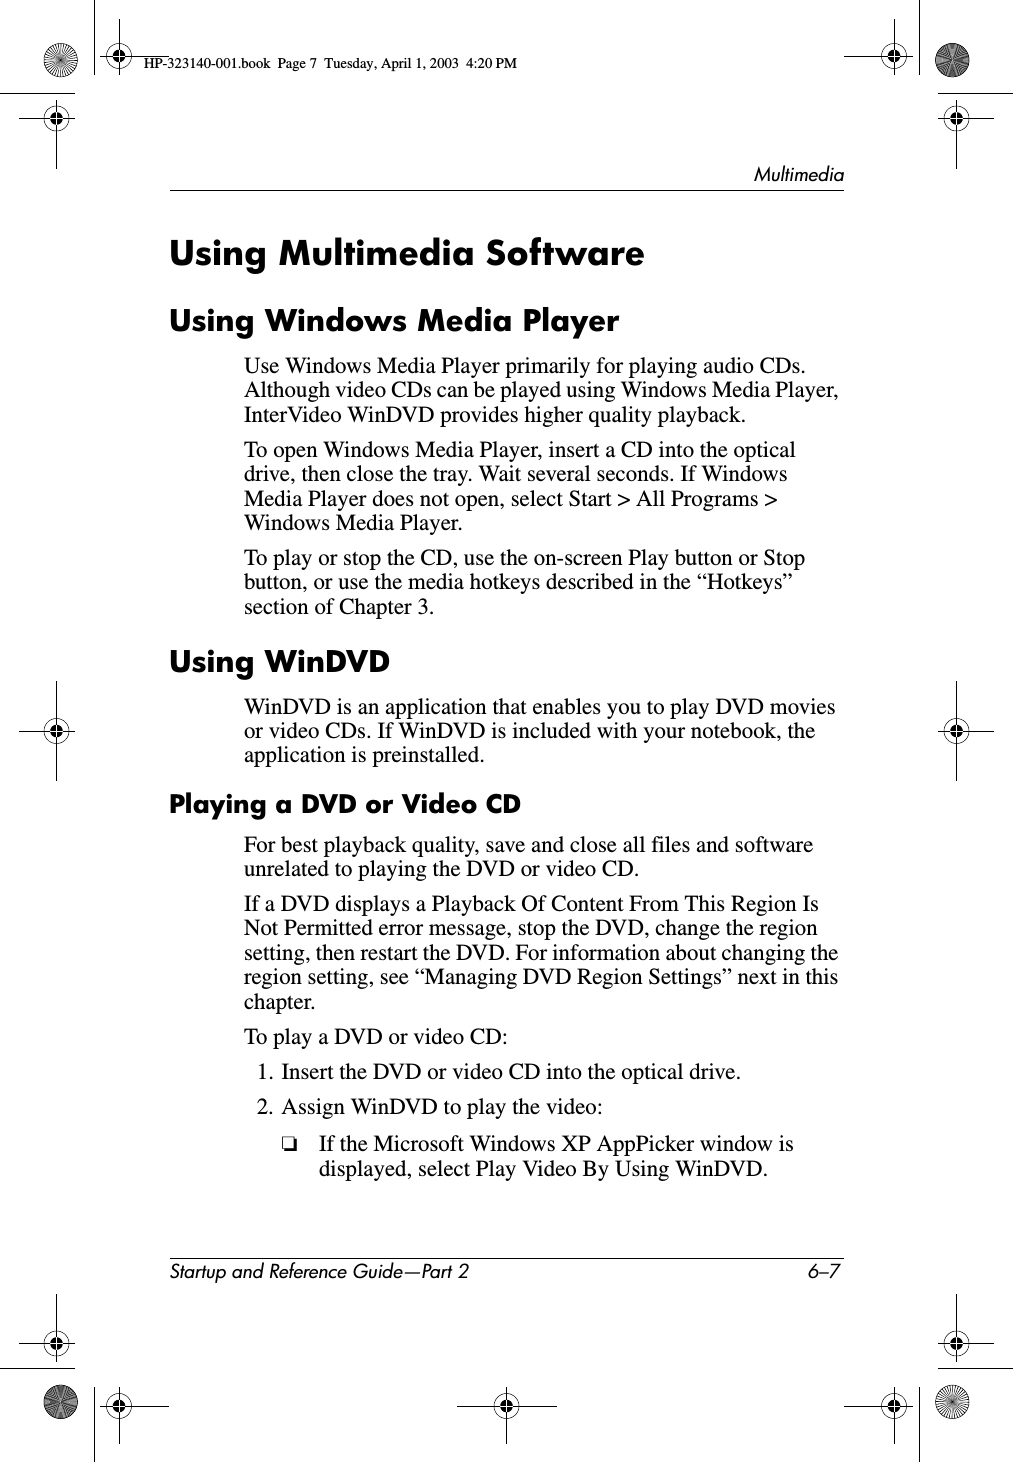 MultimediaStartup and Reference Guide—Part 2 6–7Using Multimedia SoftwareUsing Windows Media PlayerUse Windows Media Player primarily for playing audio CDs. Although video CDs can be played using Windows Media Player, InterVideo WinDVD provides higher quality playback.To open Windows Media Player, insert a CD into the optical drive, then close the tray. Wait several seconds. If Windows Media Player does not open, select Start &gt; All Programs &gt; Windows Media Player.To play or stop the CD, use the on-screen Play button or Stop button, or use the media hotkeys described in the “Hotkeys” section of Chapter 3.Using WinDVDWinDVD is an application that enables you to play DVD movies or video CDs. If WinDVD is included with your notebook, the application is preinstalled.Playing a DVD or Video CDFor best playback quality, save and close all files and software unrelated to playing the DVD or video CD.If a DVD displays a Playback Of Content From This Region Is Not Permitted error message, stop the DVD, change the region setting, then restart the DVD. For information about changing the region setting, see “Managing DVD Region Settings” next in this chapter.To play a DVD or video CD:1. Insert the DVD or video CD into the optical drive.2. Assign WinDVD to play the video:❏If the Microsoft Windows XP AppPicker window is displayed, select Play Video By Using WinDVD.HP-323140-001.book  Page 7  Tuesday, April 1, 2003  4:20 PM